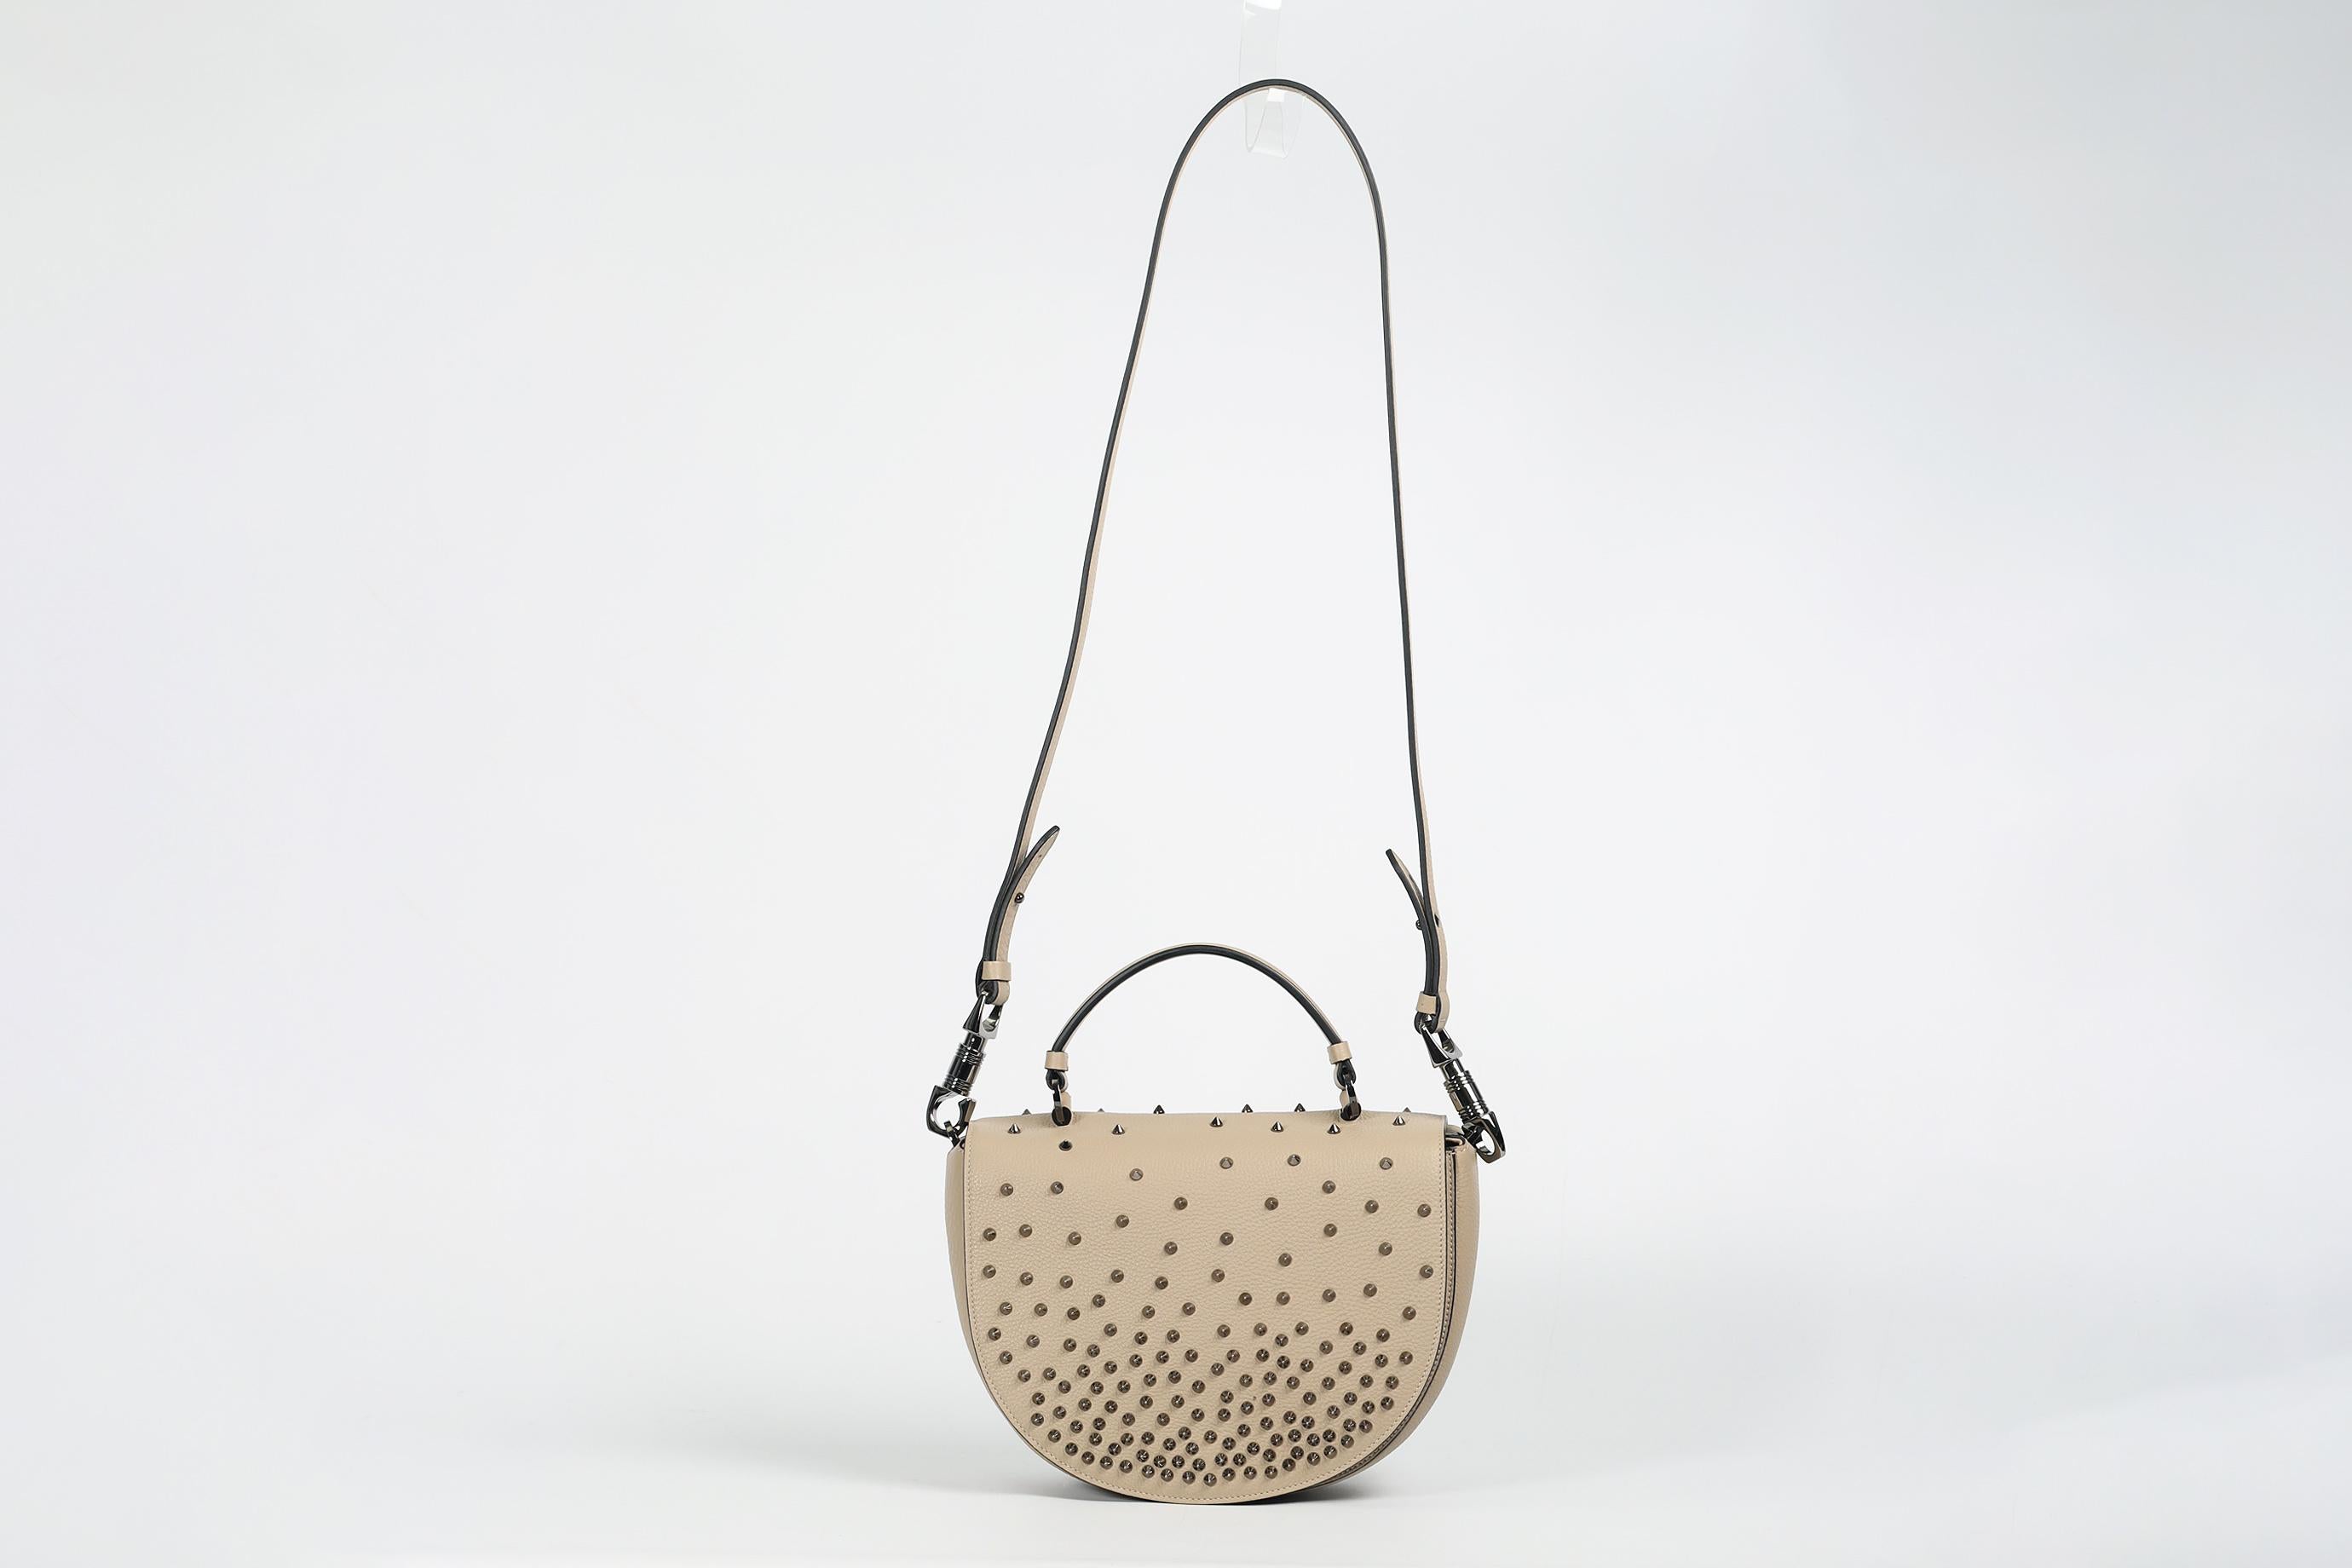 Christian Louboutin Panettone Spiked Leather Shoulder Bag For Sale 3